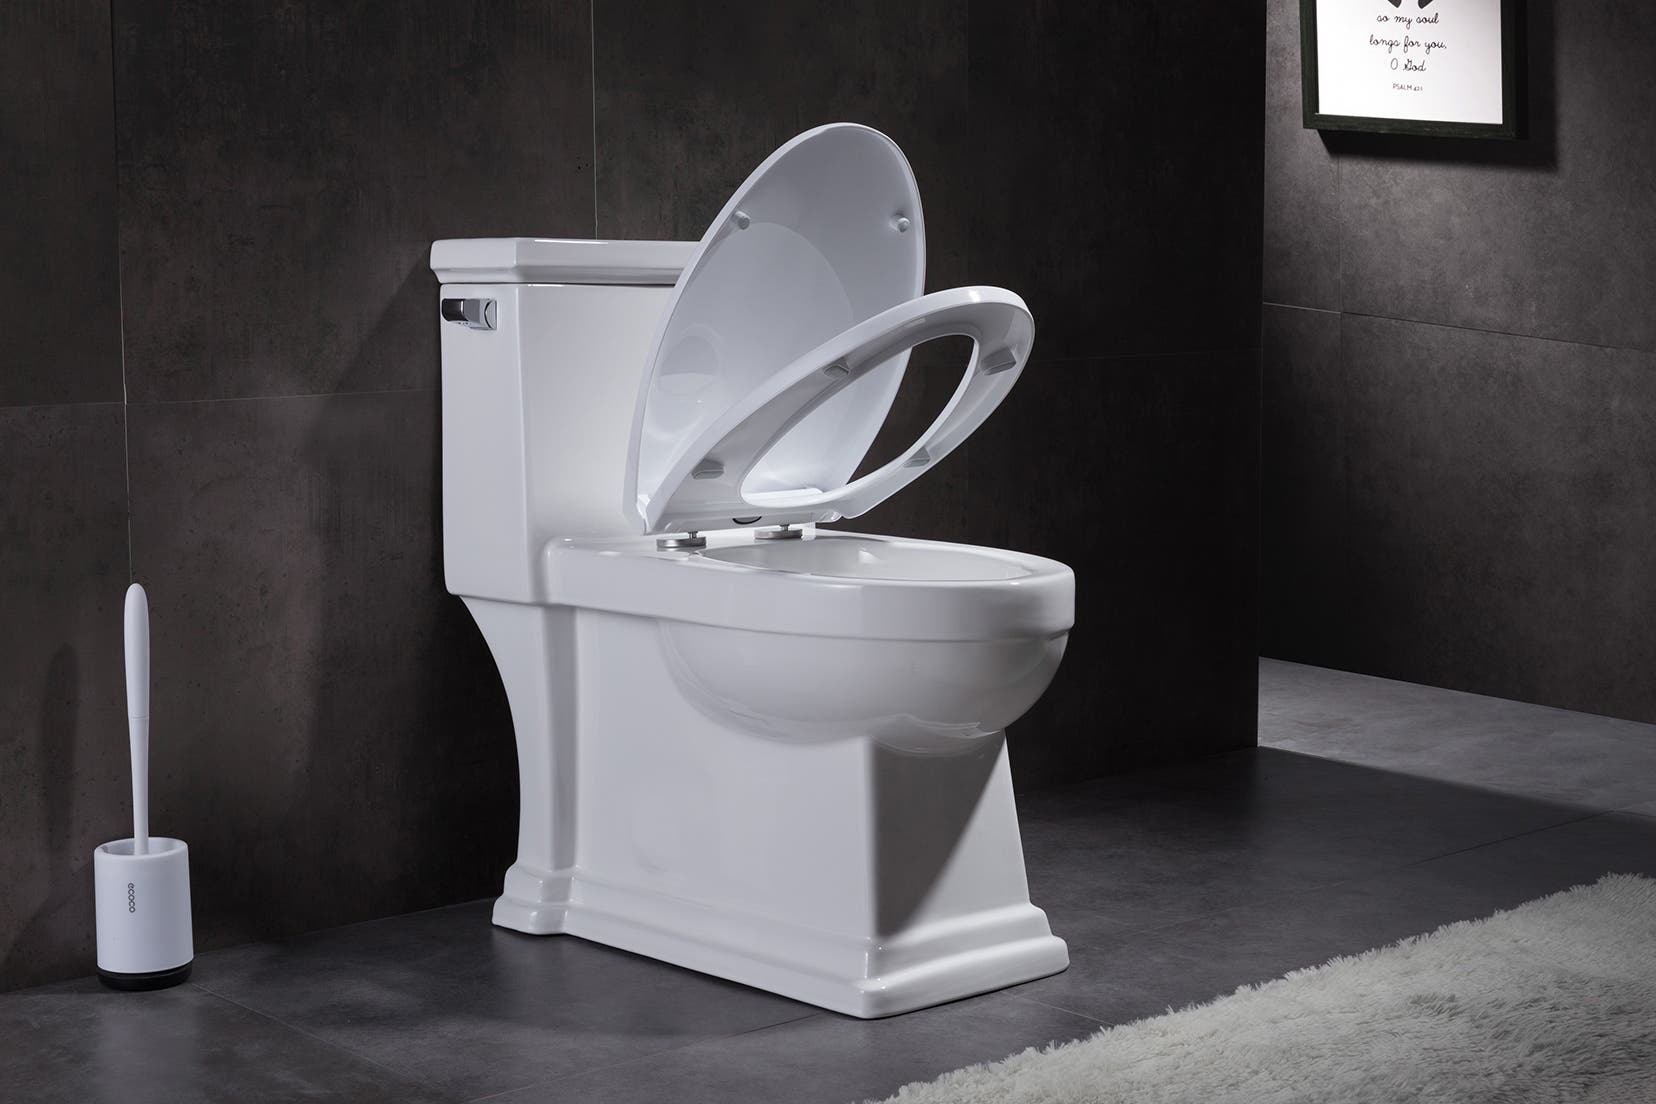 Toilets and Accessories Lookbook - August 2020